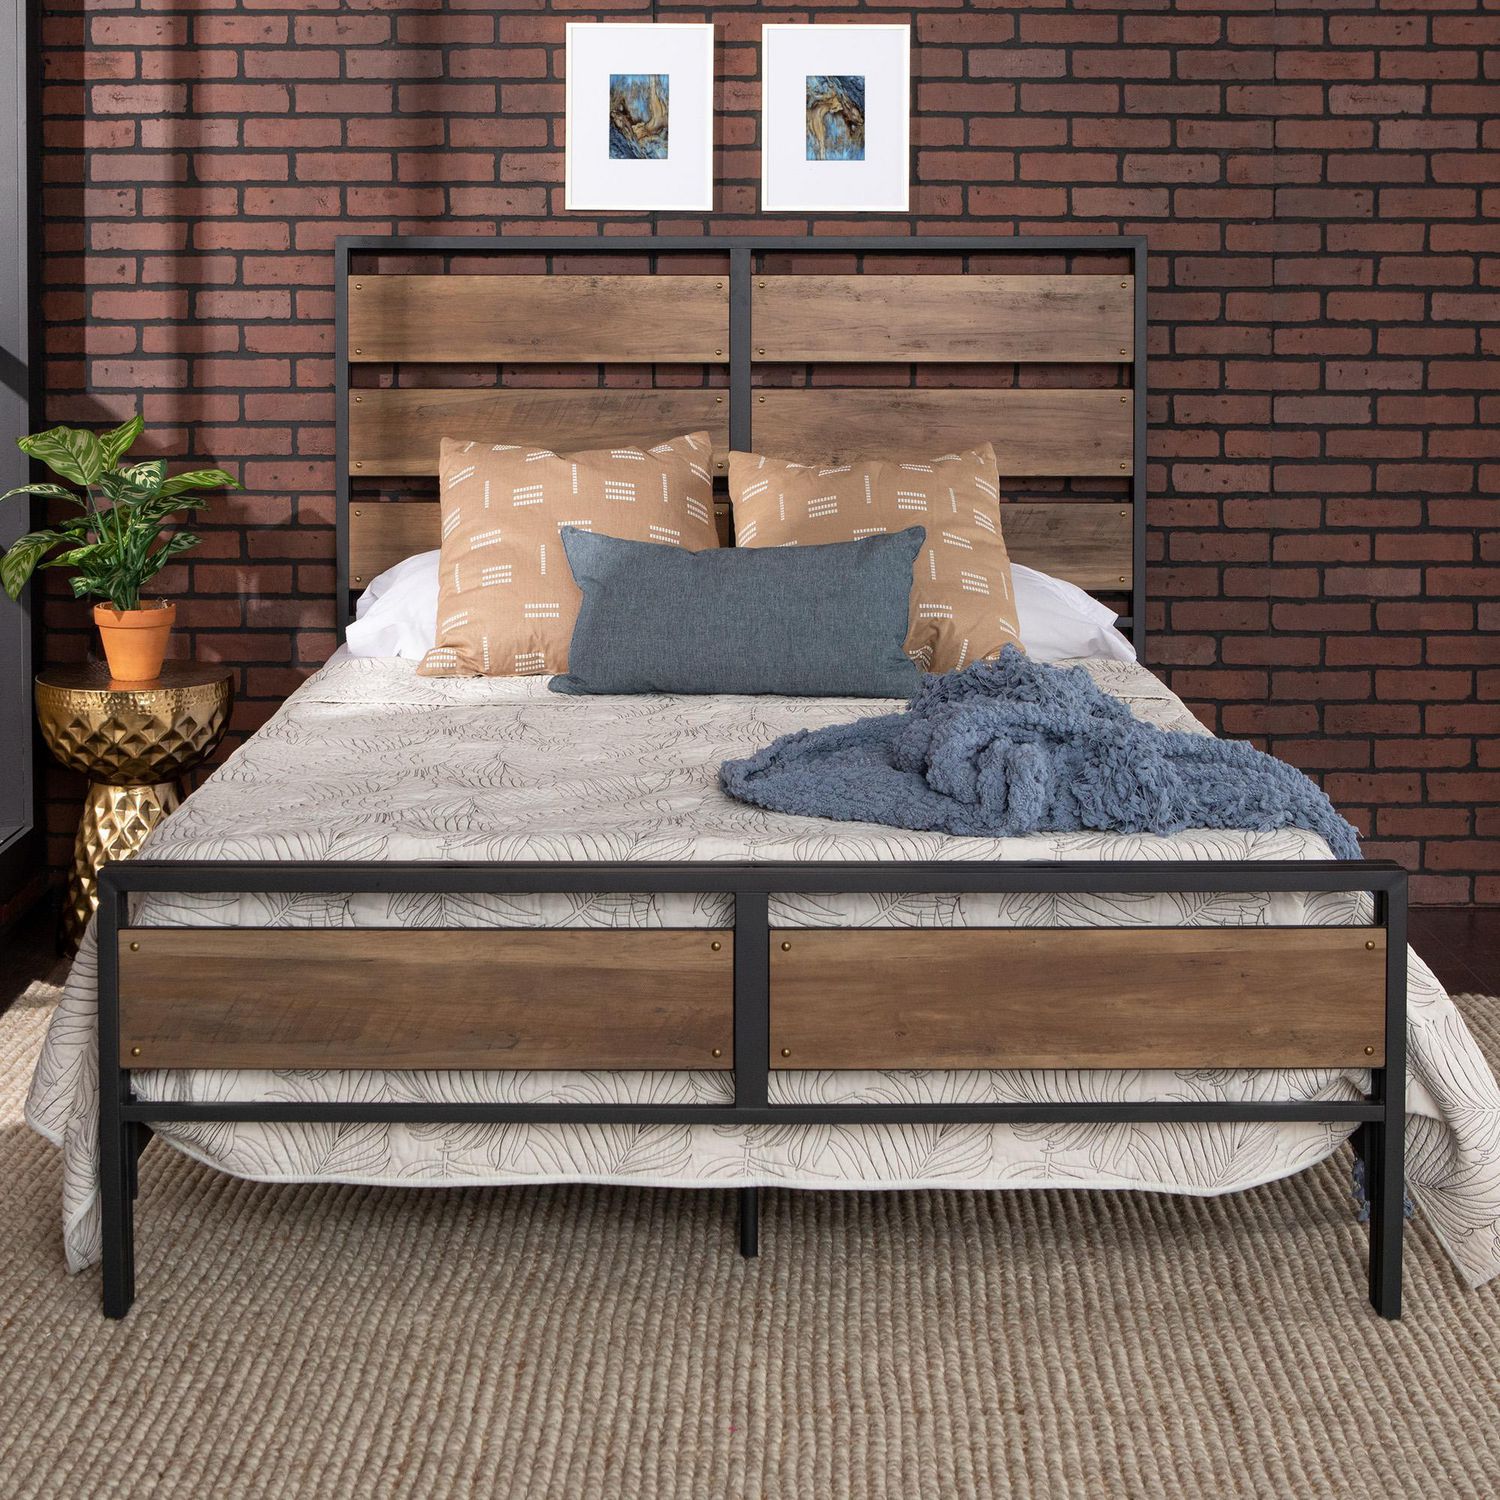 Manor Park Wood Plank And Metal Queen Size Bed And Frame Reclaimed Barnwood Walmart Canada